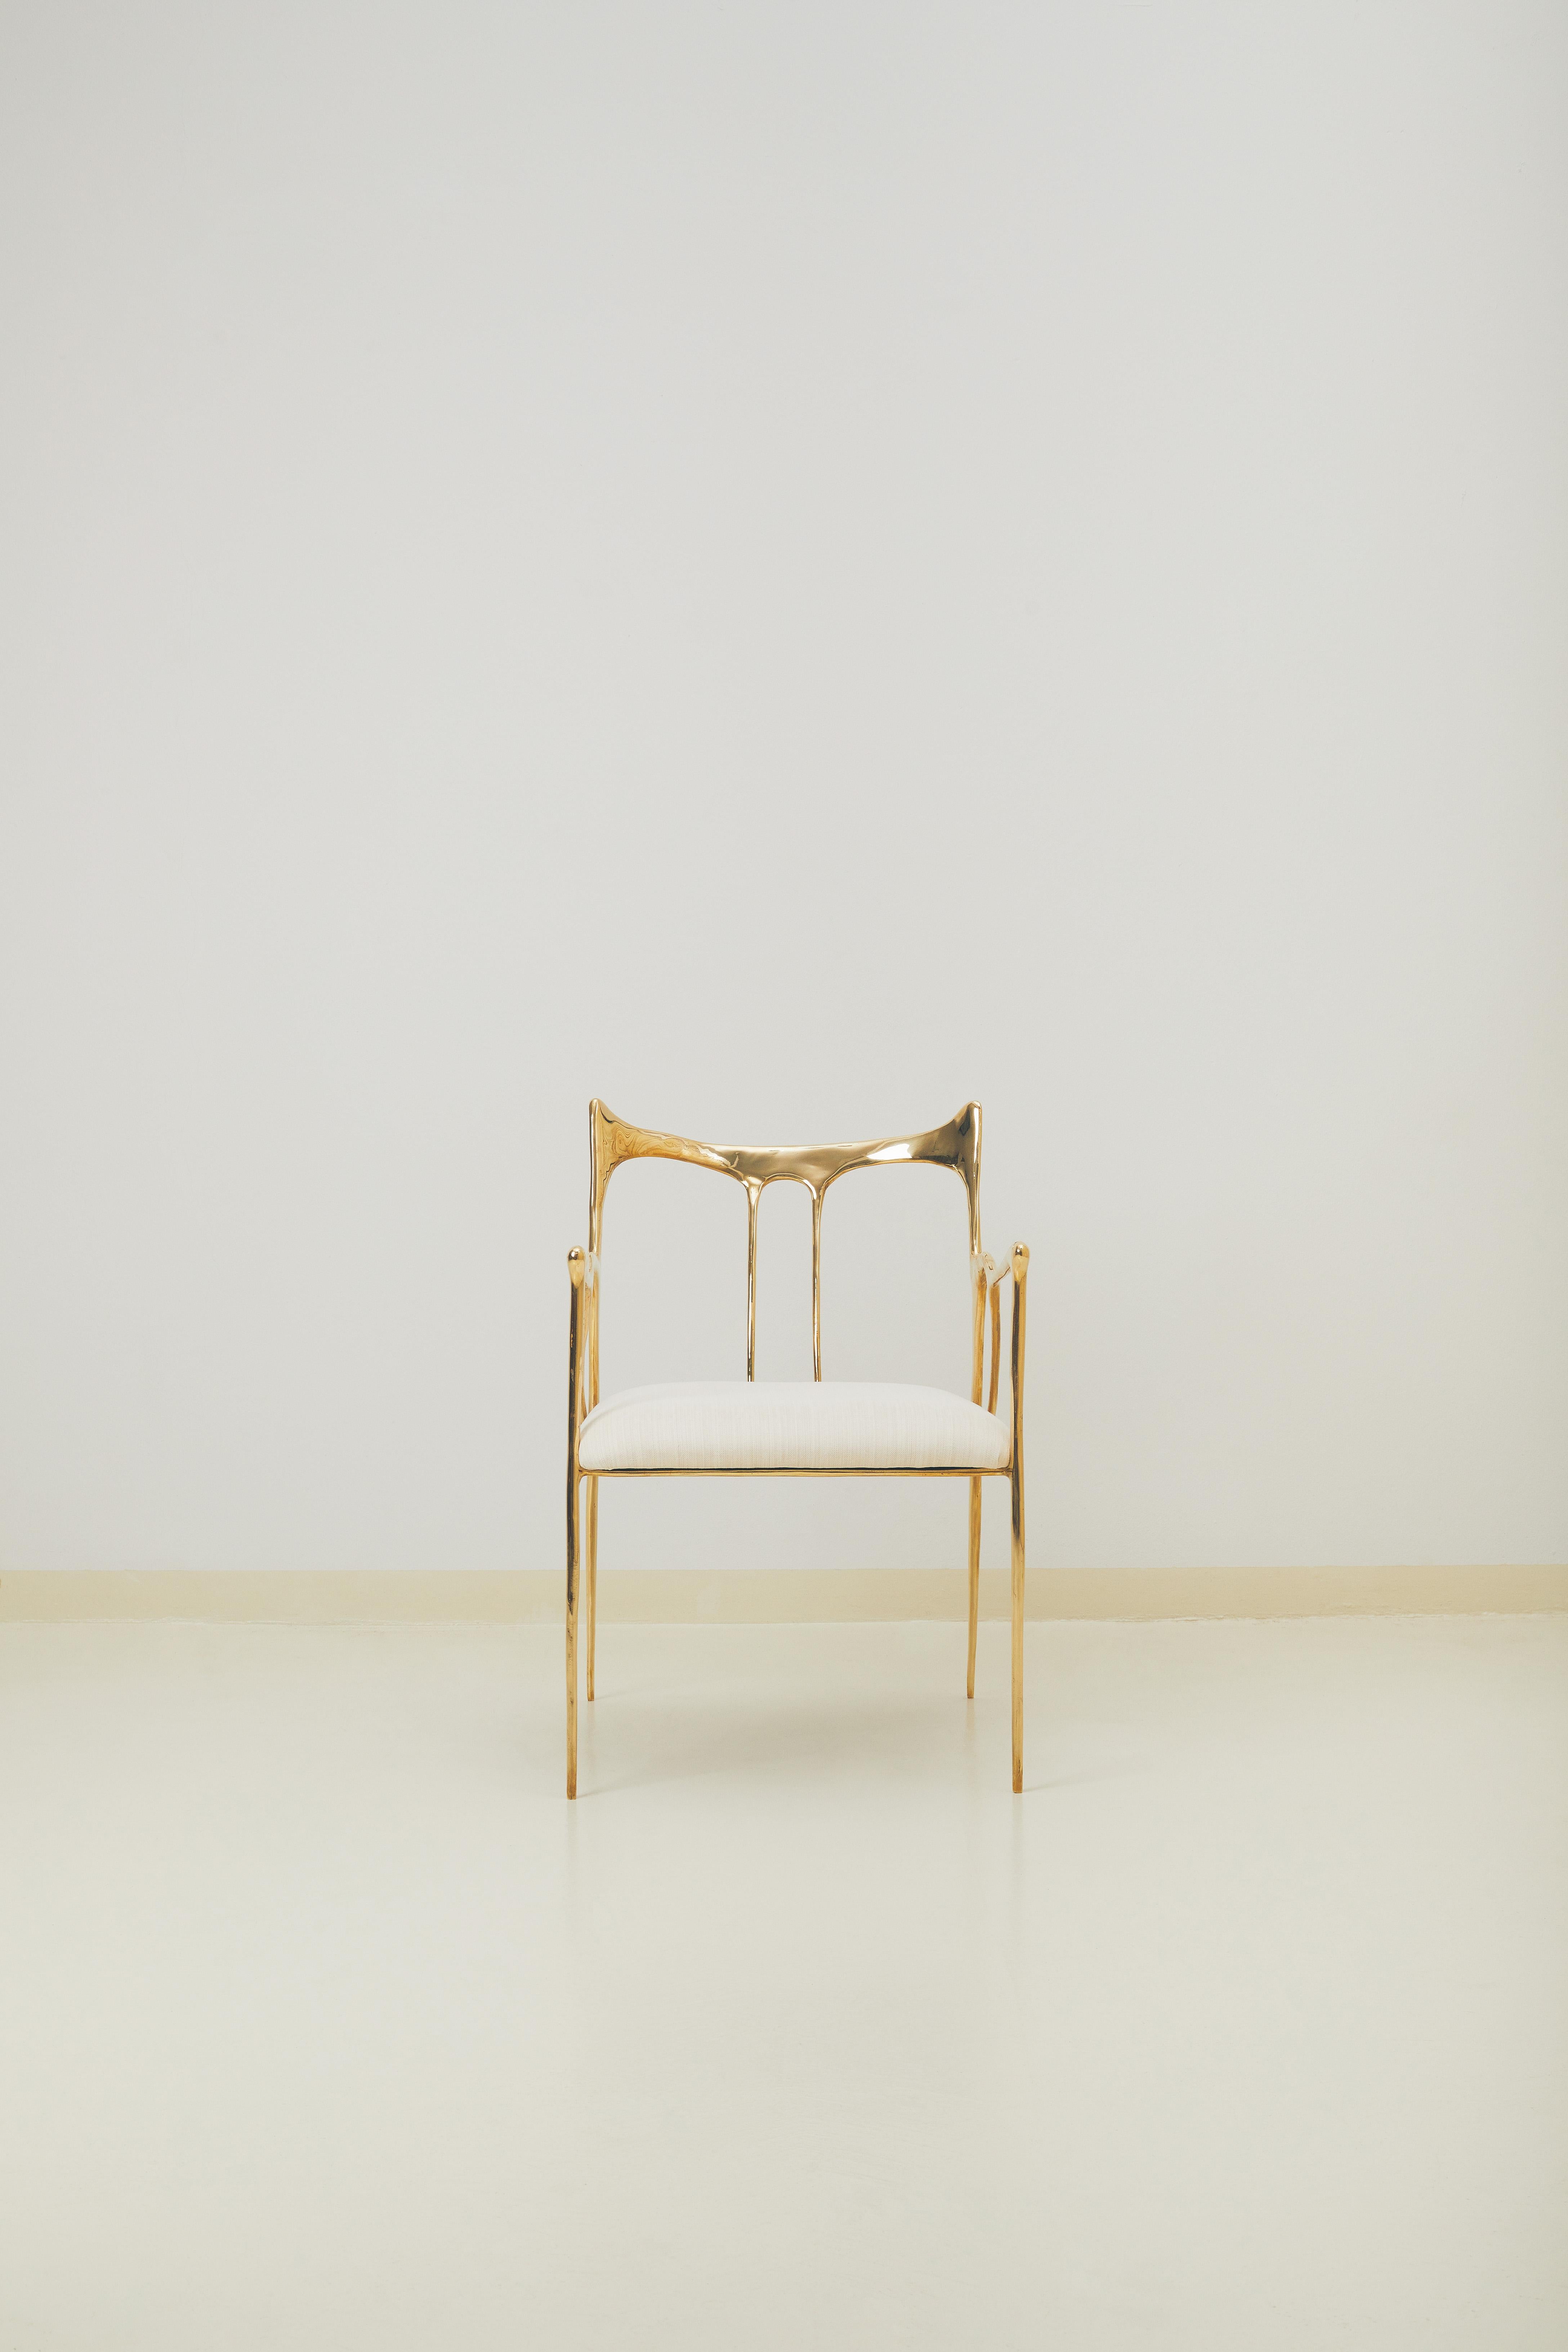 Calligraphic sculpted brass chair by Misaya
Dimensions: W 58 x L 54 x H 79 cm
Materials: Brass

Hand-sculpted brass chair.

Misaya emulates Chinese ink paintings through the process of lost-wax casting.

Each piece in the Ink collection,